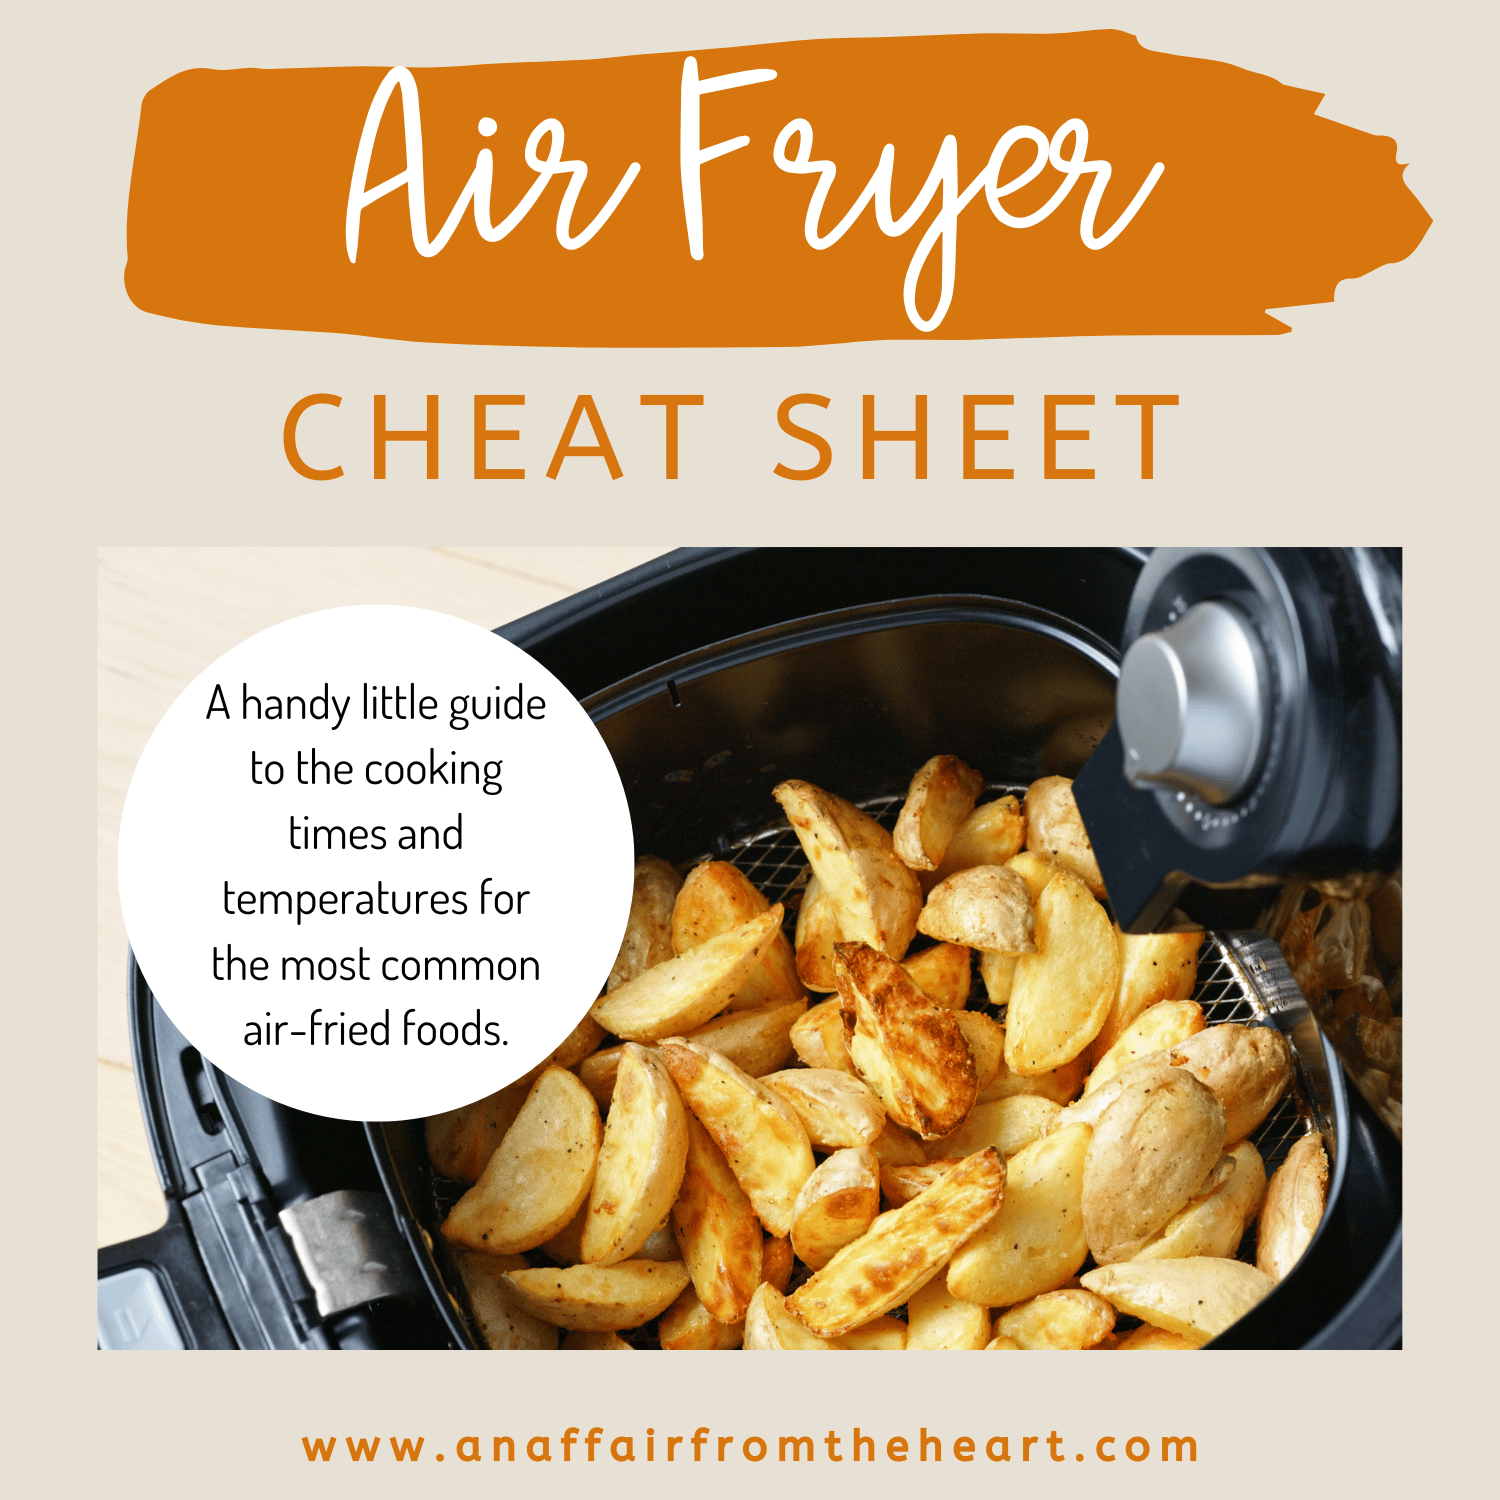 Air Fryer Cooking Times Cheat Sheet [Free Printable] - Air Fry Anytime